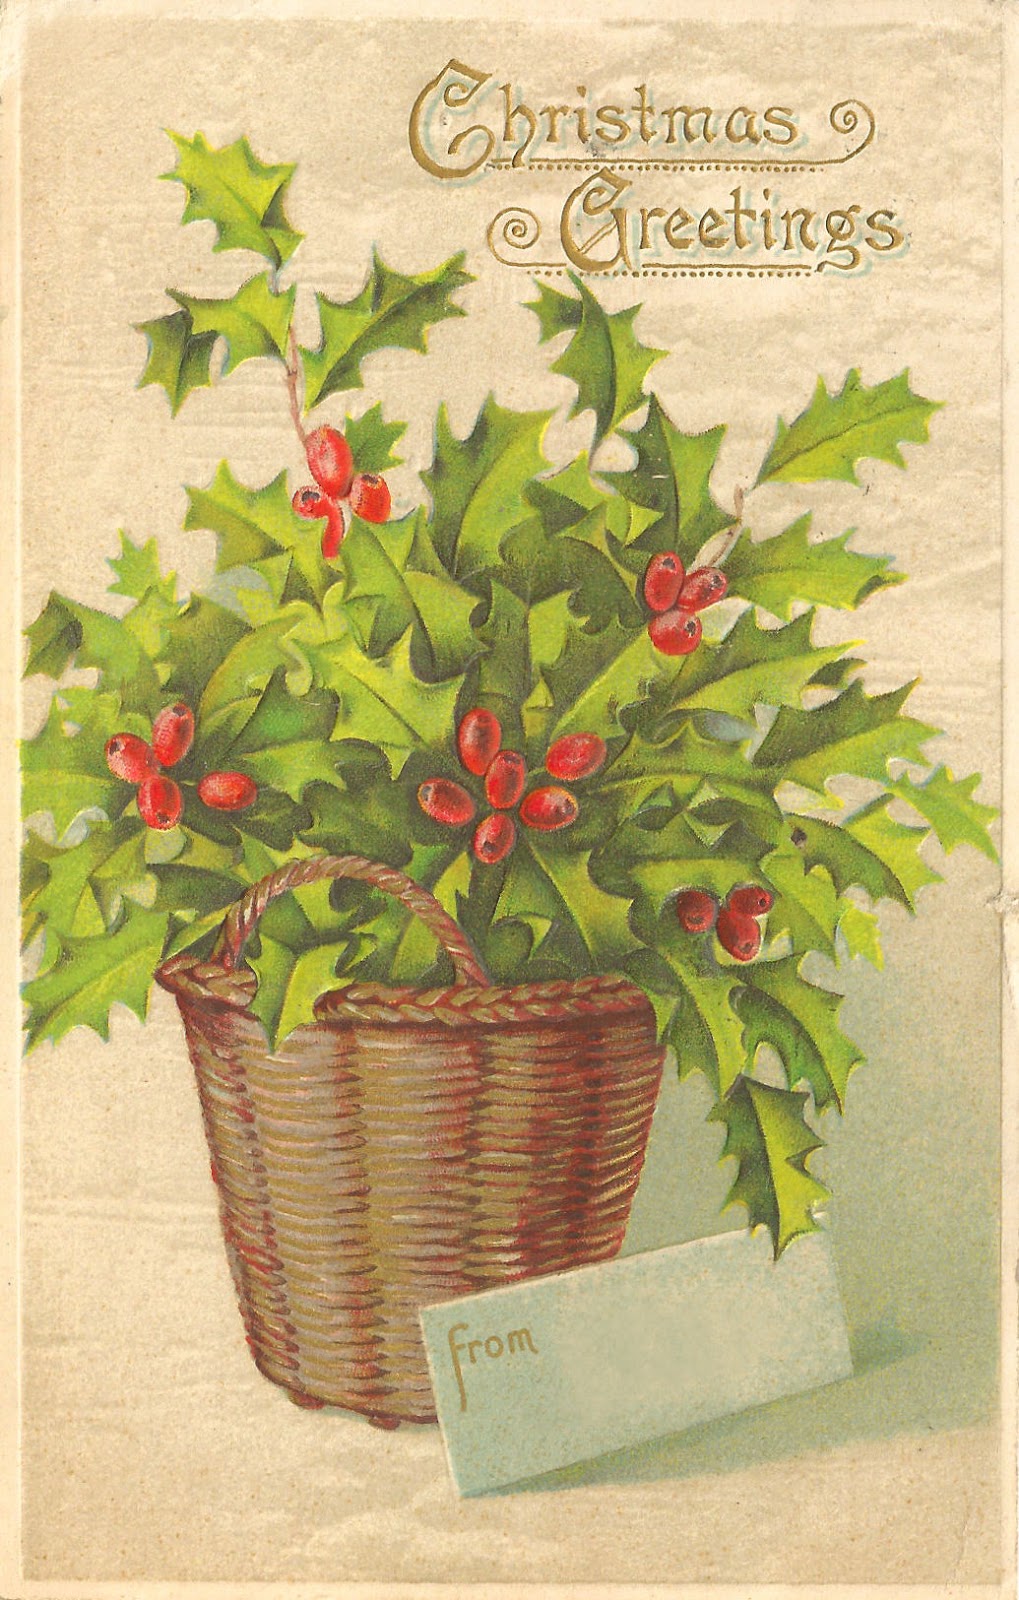 antique-images-free-vintage-christmas-printable-gift-tag-vintage-christmas-postcard-with-holly